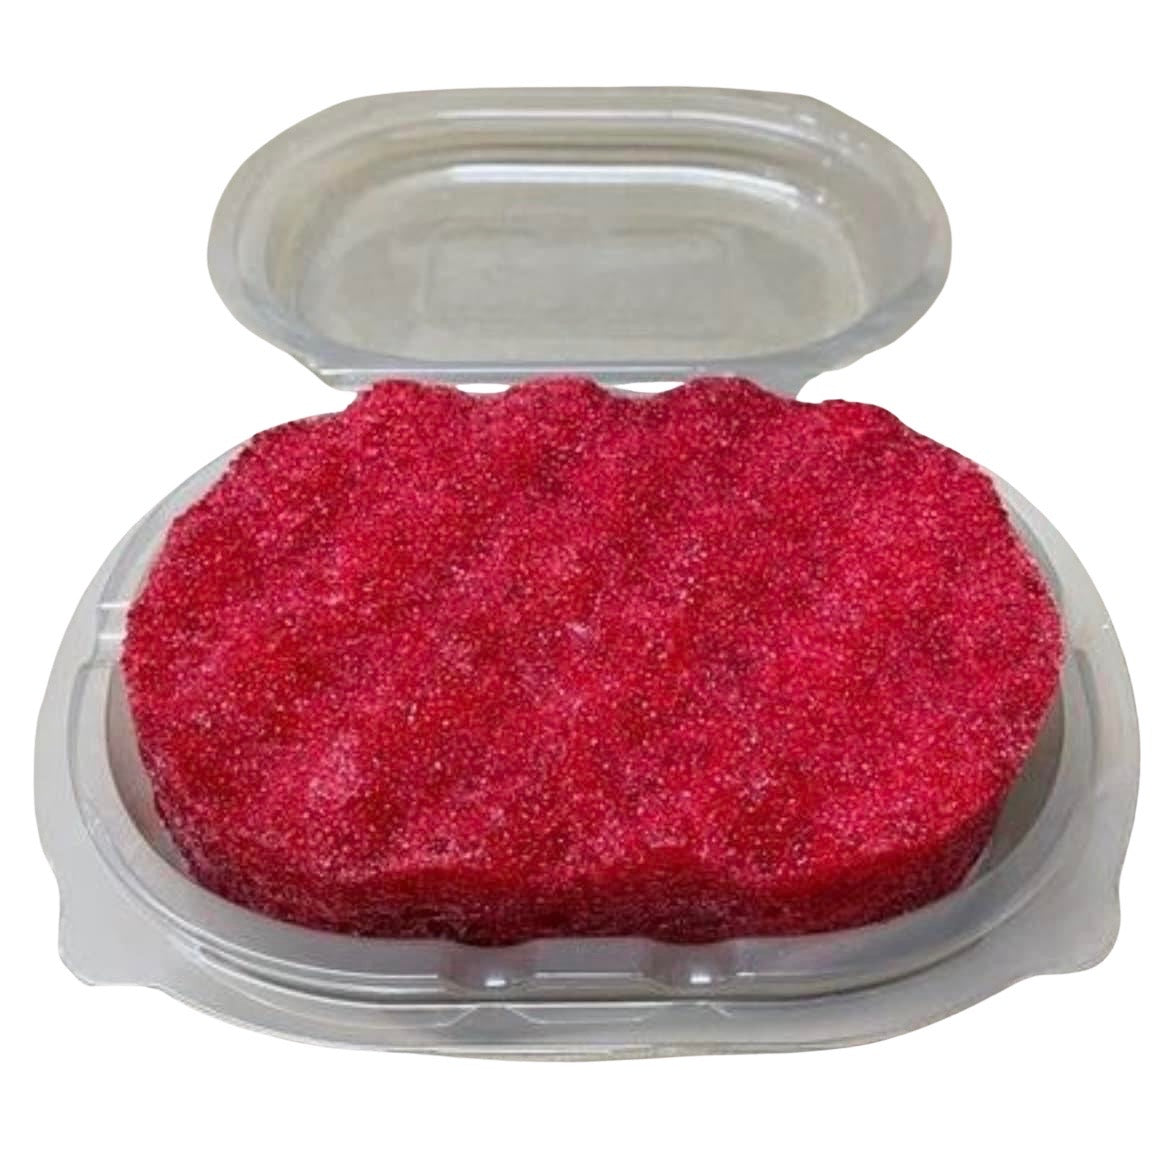 A plastic container with a red Various Fragrant Soap Sponges - None Inspired Range exfoliator candy in it by The Soap Gals.